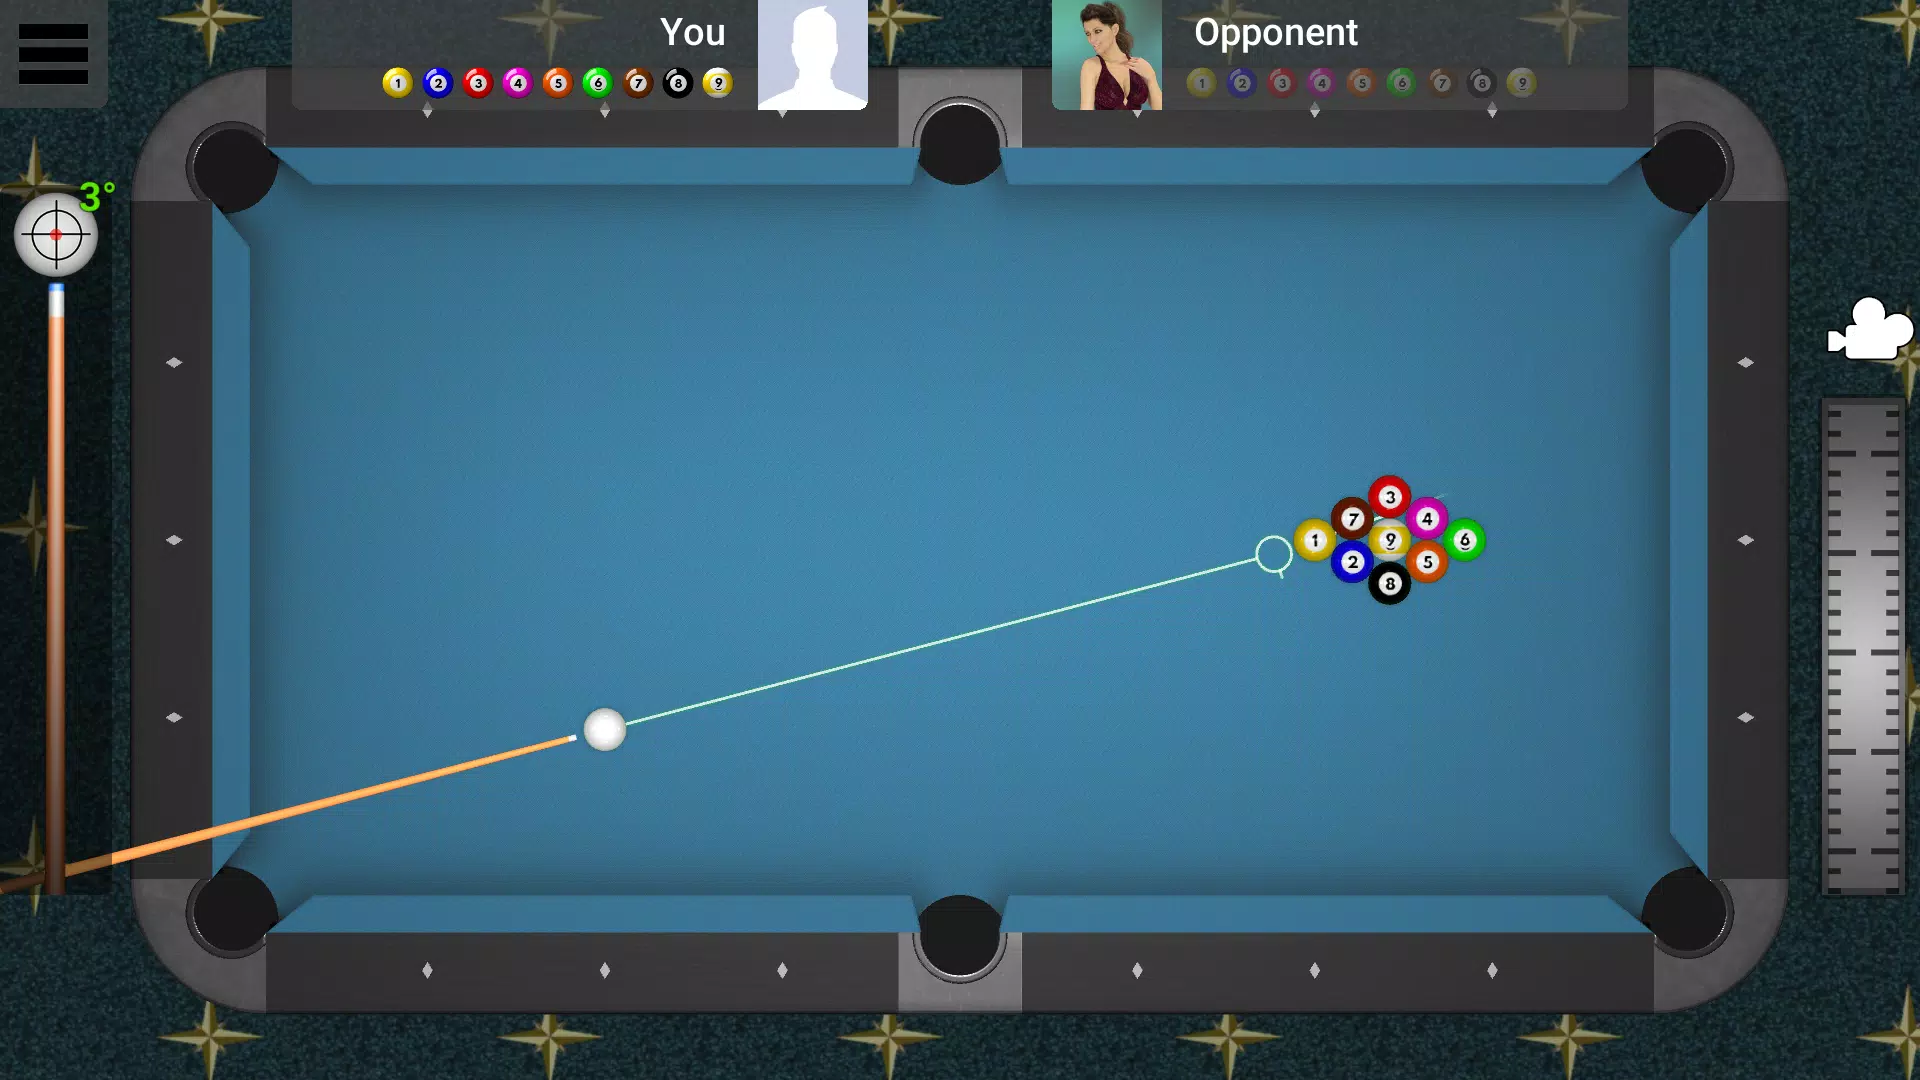 8 Ball Real Pool Billiard: Multiplayer Online Game APK for Android